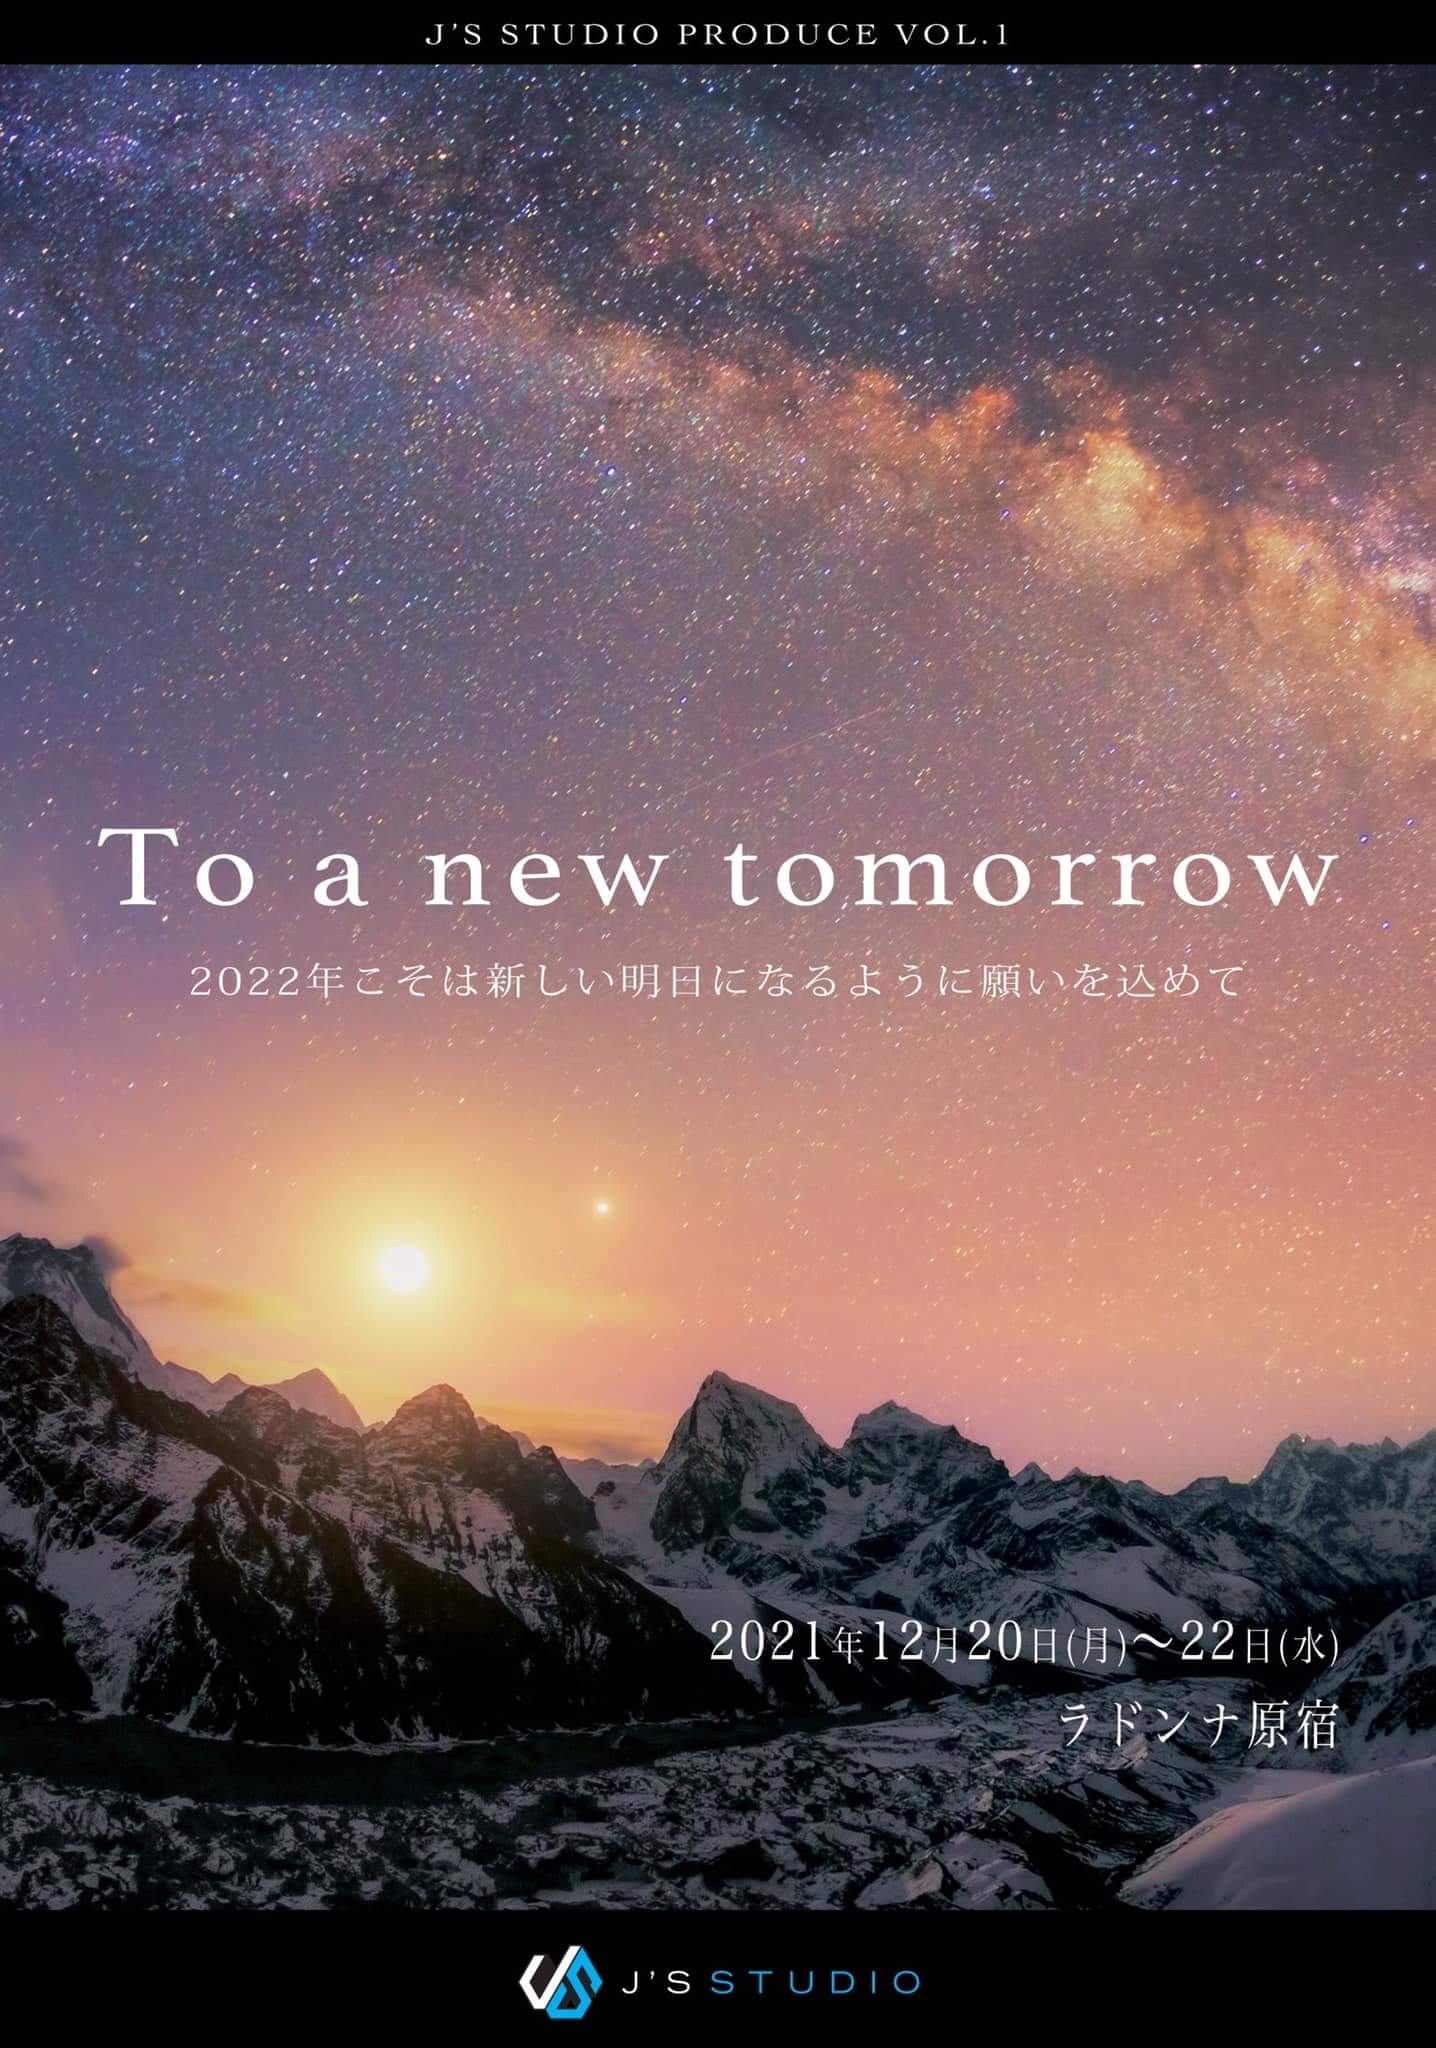 To a new tomorrow